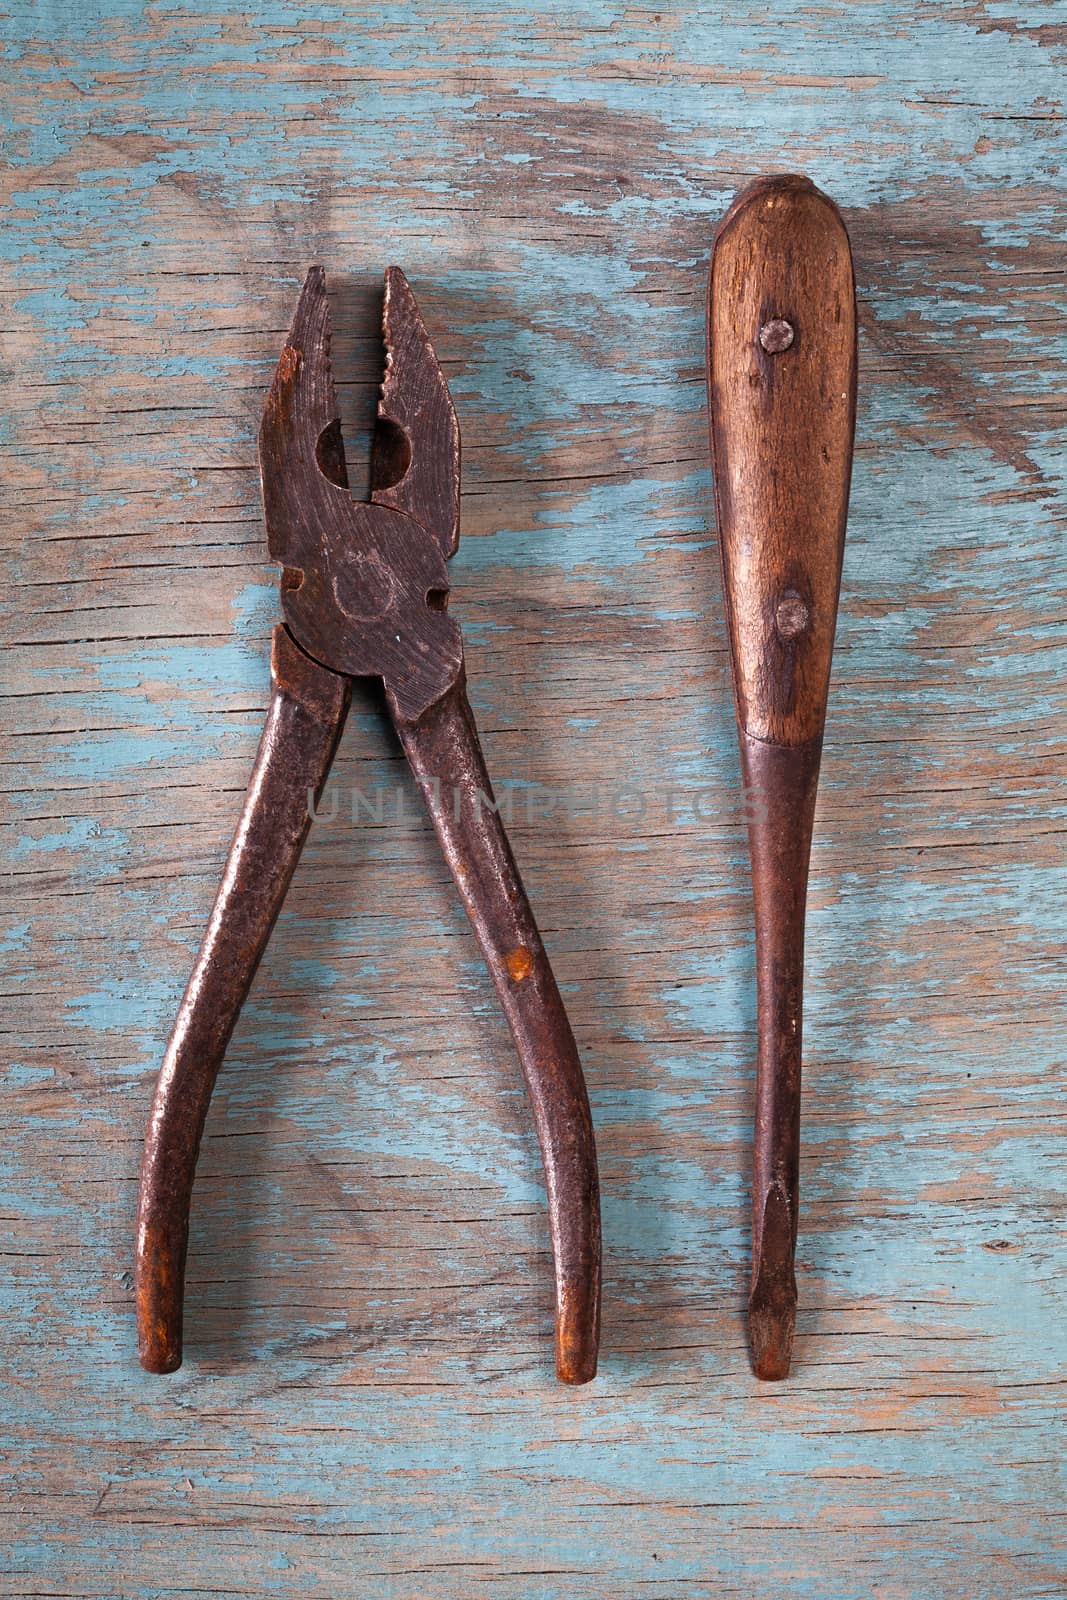 Vintage tools on a blue wooden background by igor_stramyk